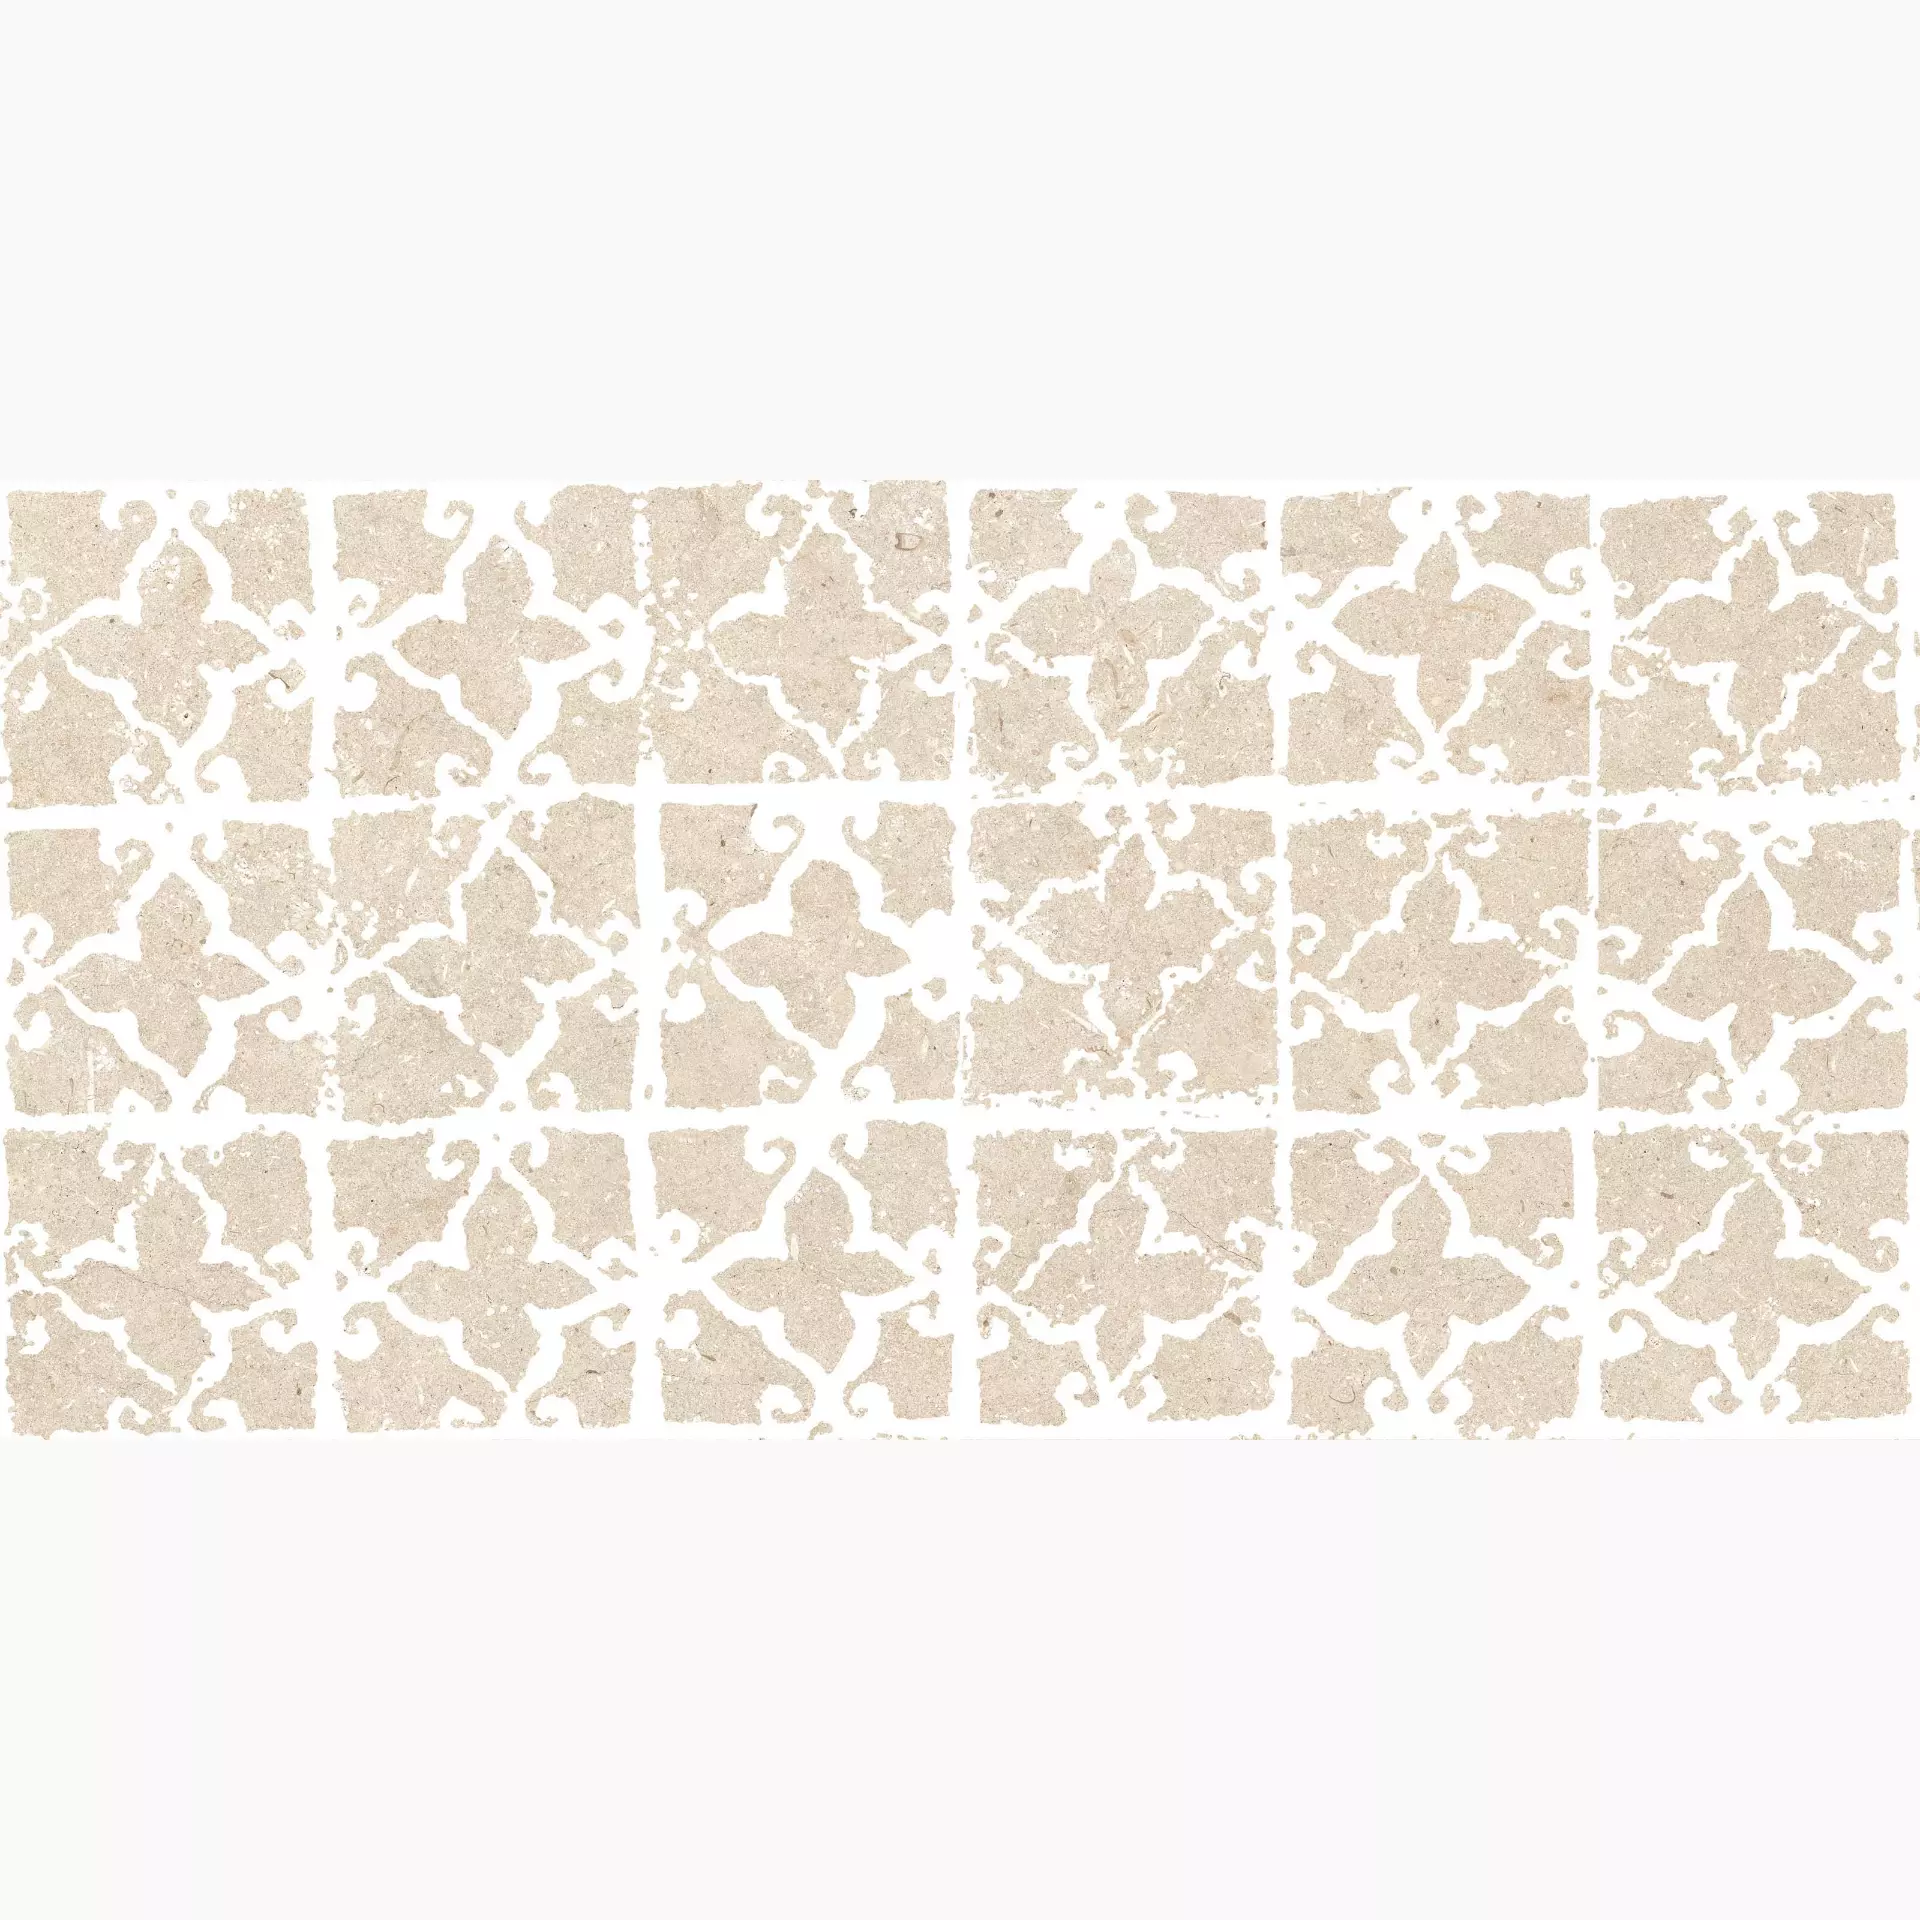 ABK Poetry Stone Beige Naturale Decor Stamp PF60011099 60x120cm rectified 8,5mm